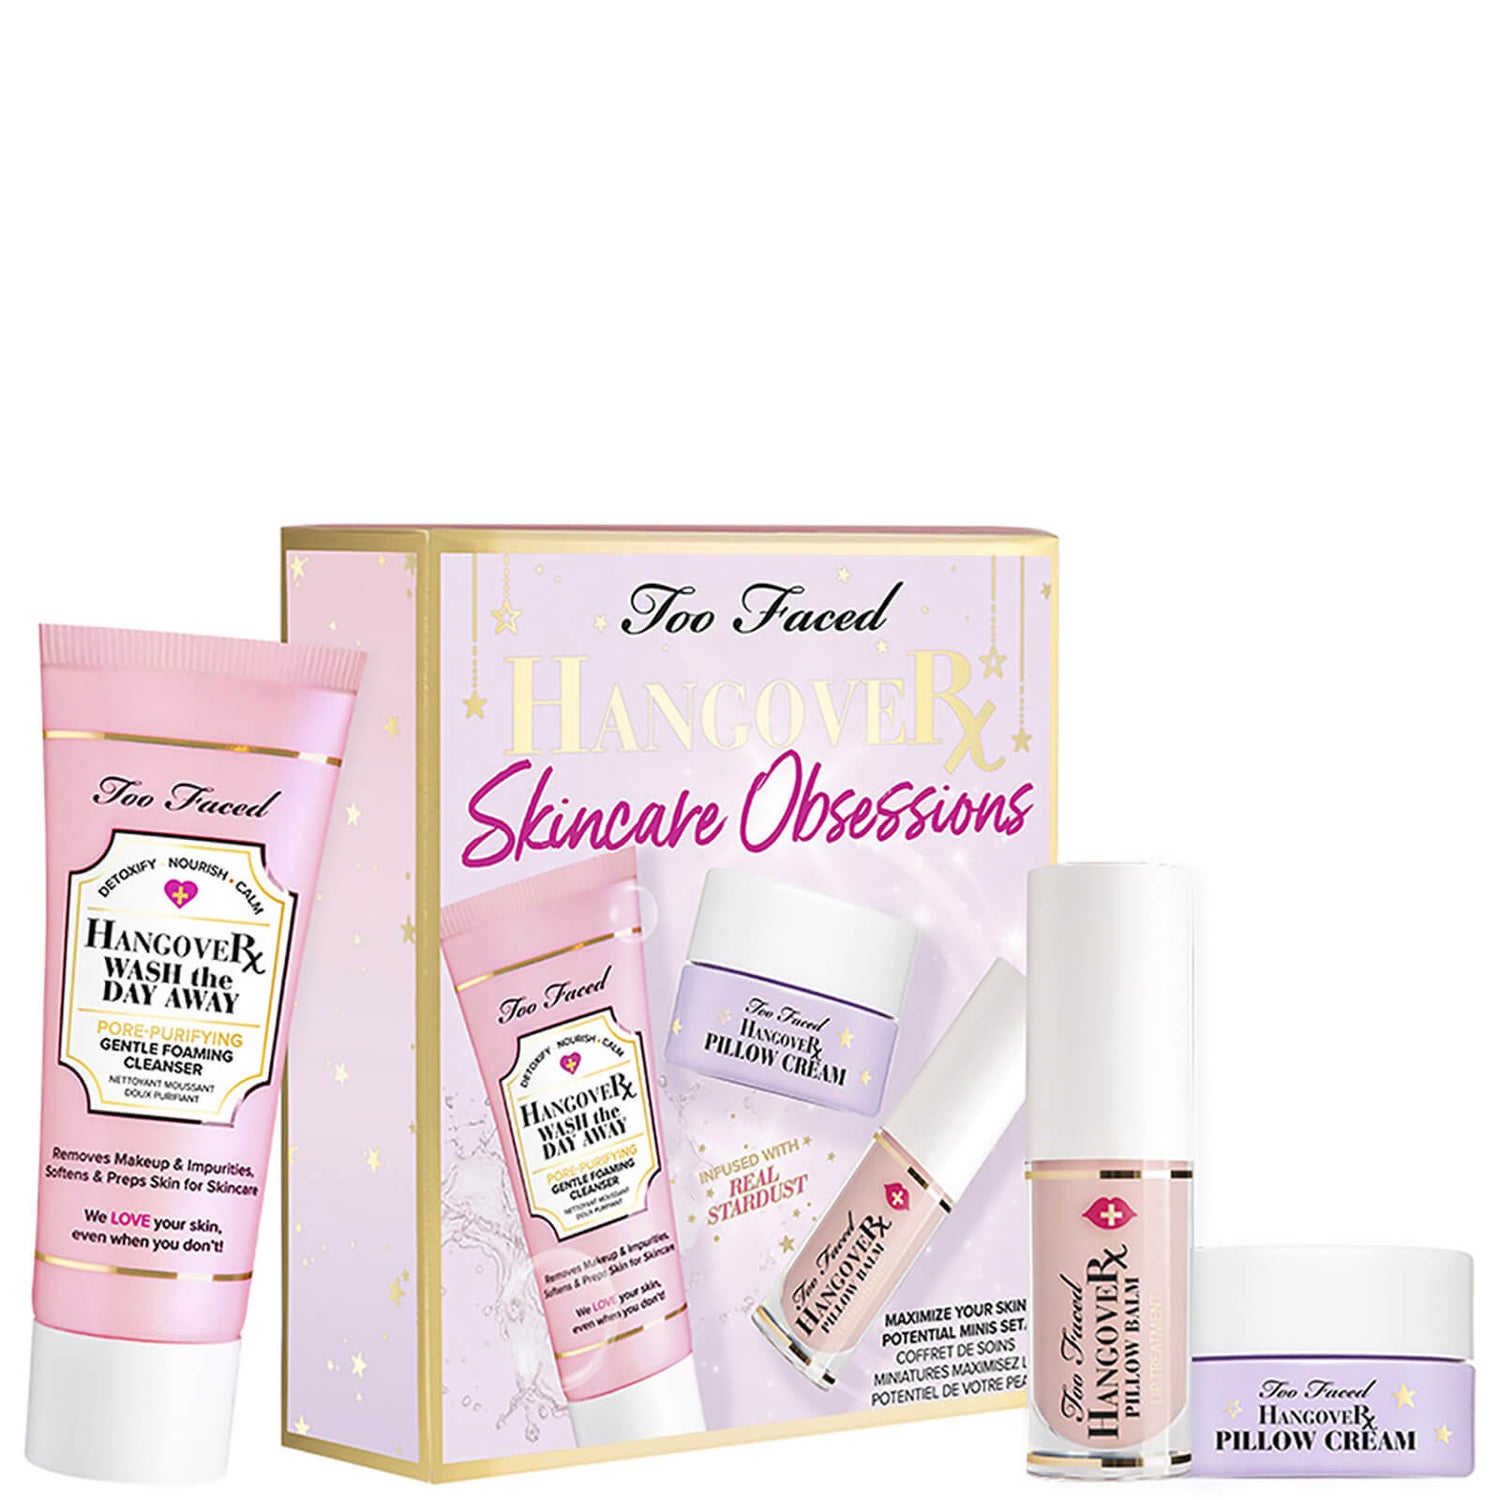 Too Faced Hangover Skincare Obsessions Set (Worth £36.00)